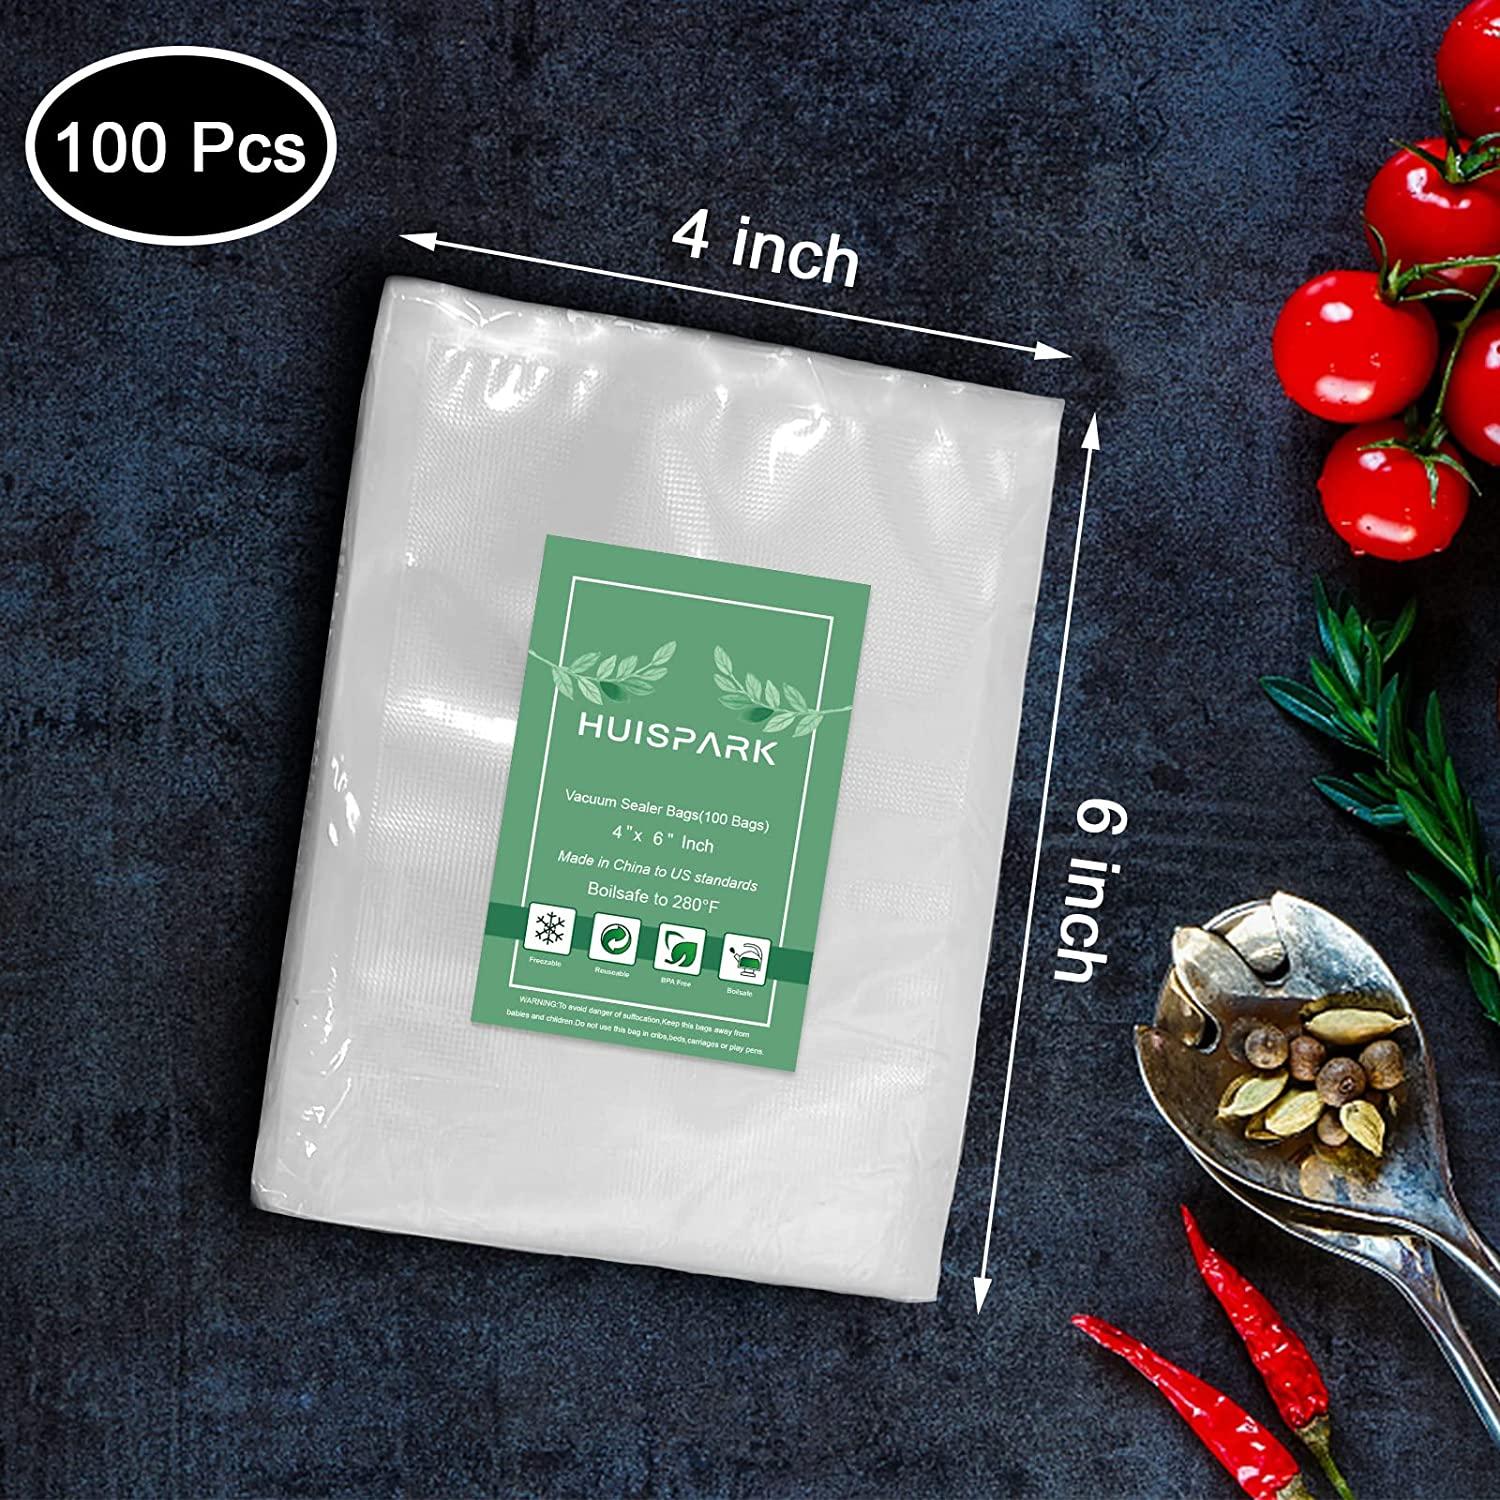 ATSAMFR 4mil 100 Gallon Size11x16Inch Vacuum Sealer Food Bags with BPA Free,Heavy Duty,Great for VAC Storage or Sous Vide Cooking